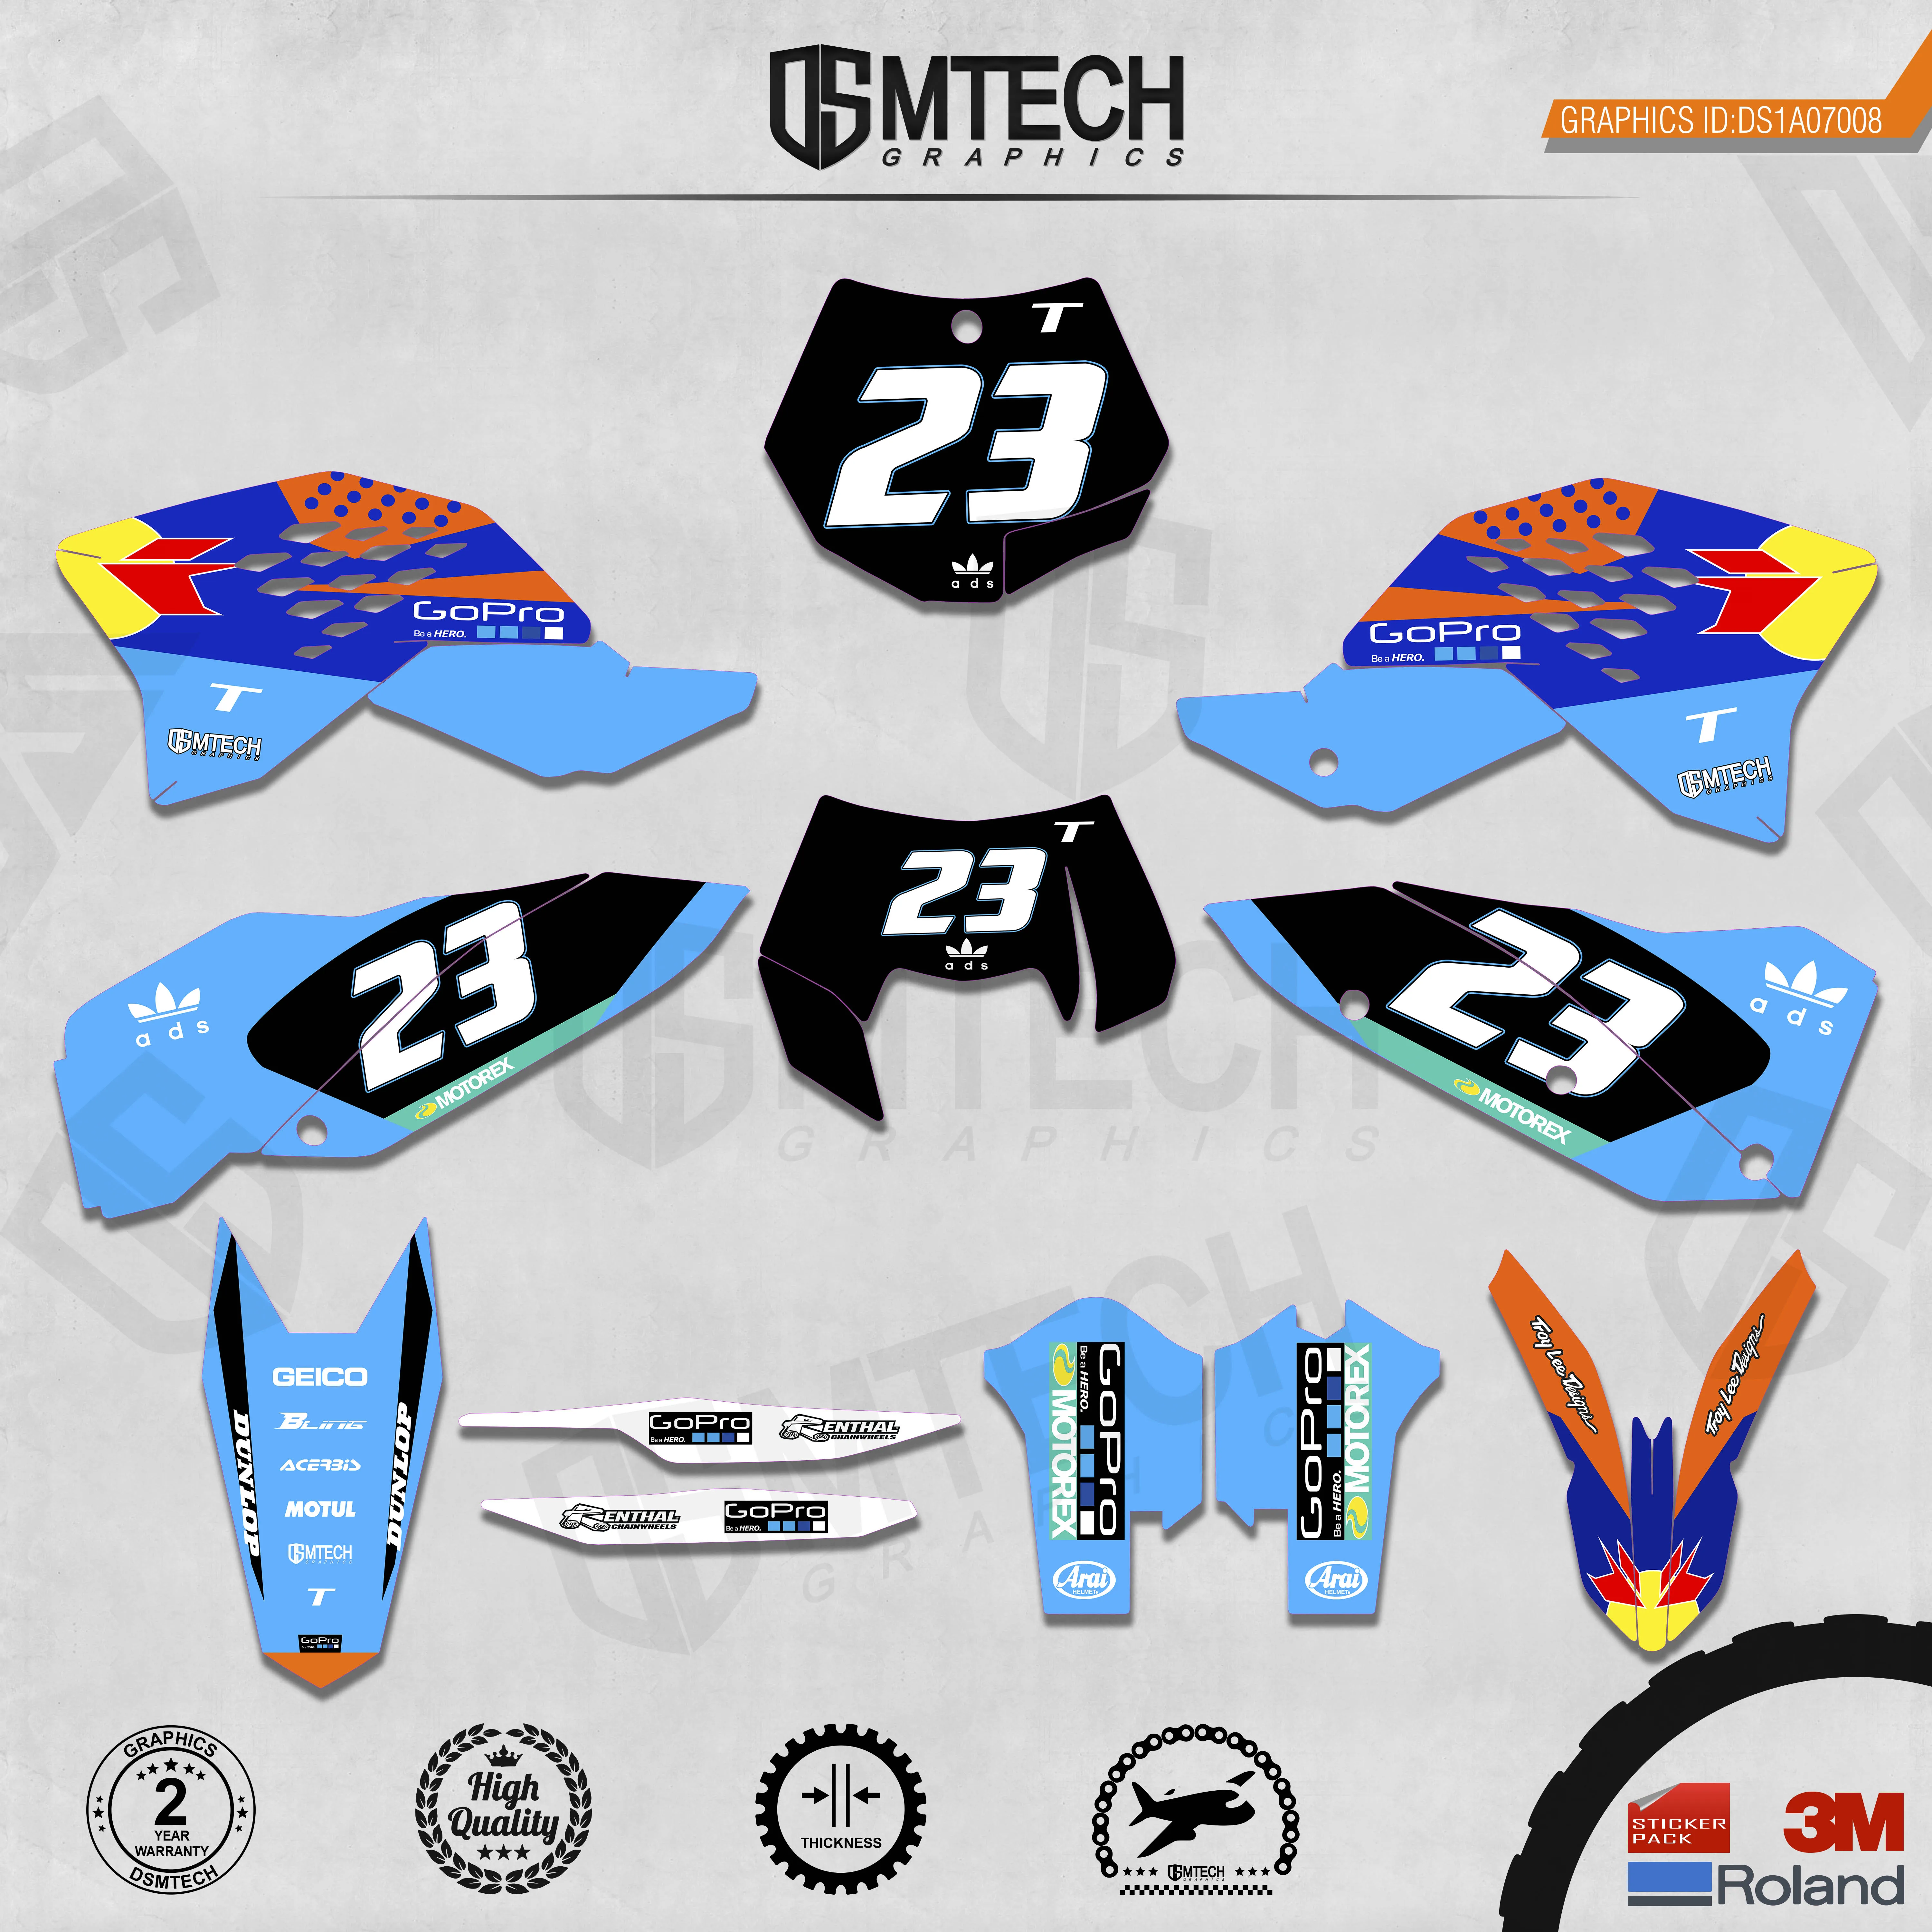 DSMTECH Customized Team Graphics Backgrounds Decals 3M Custom Stickers For 2007-2010 SXF  2008-2011 EXC  008